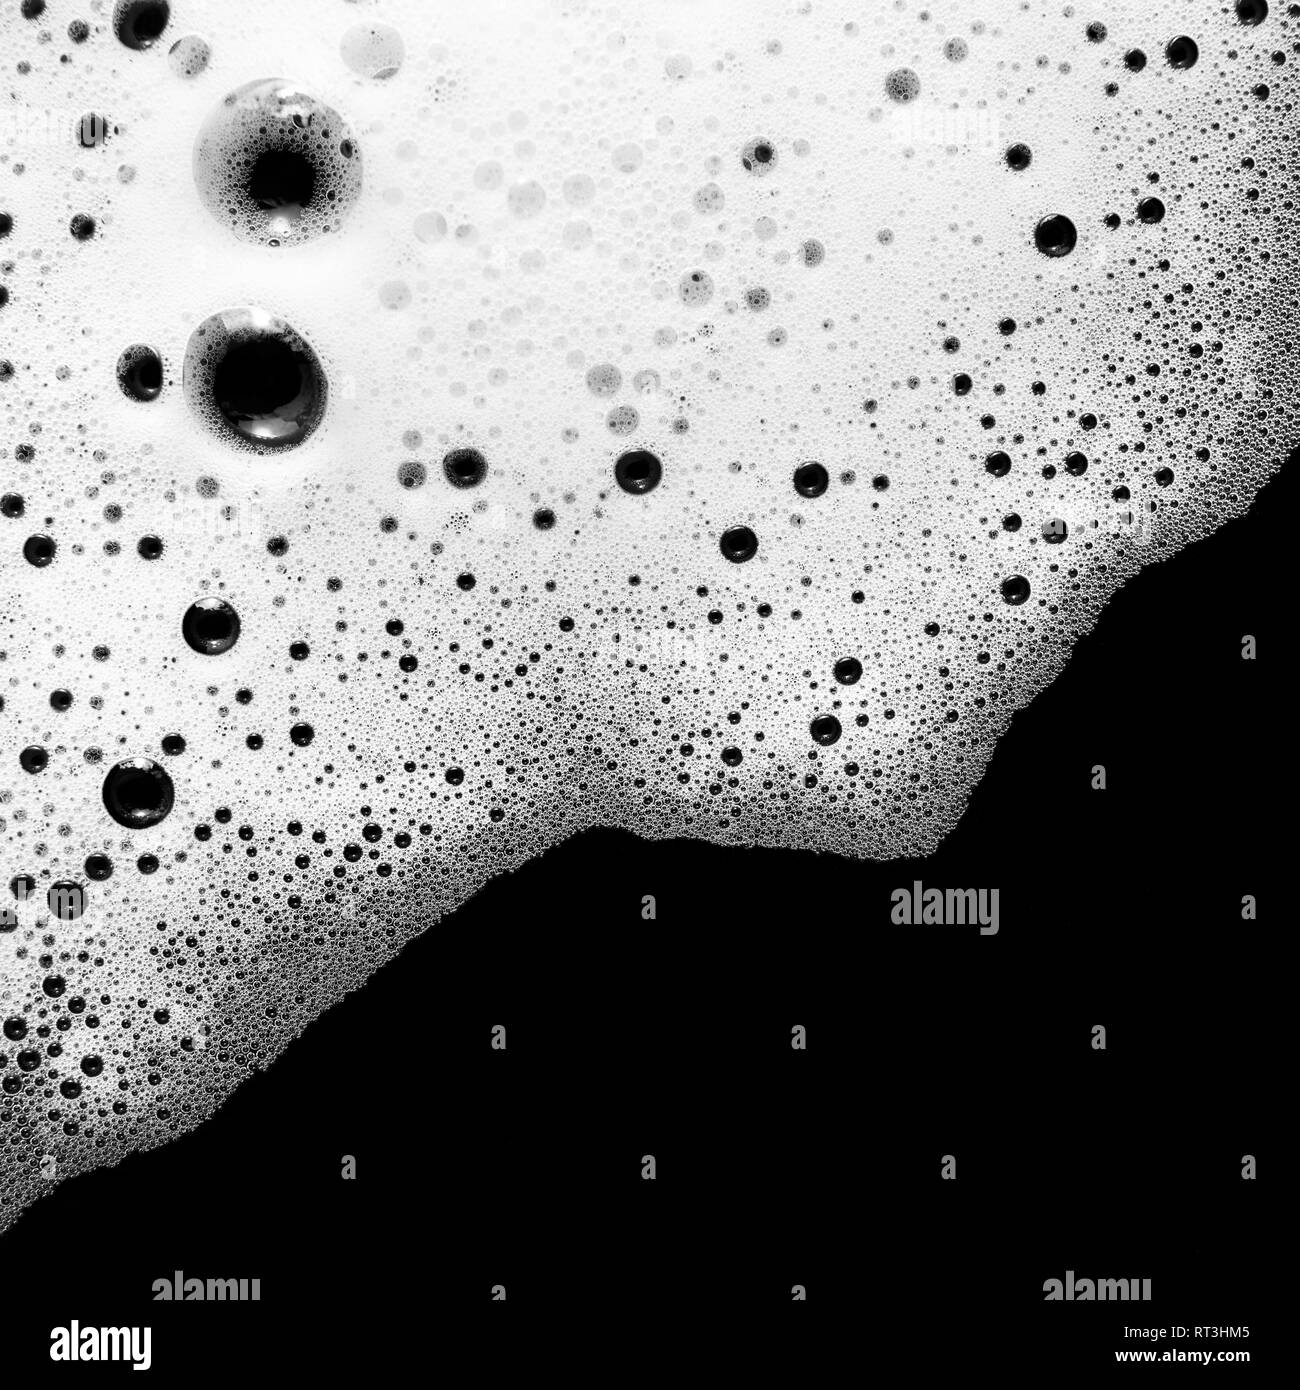 Foam with bubbles on black background. Soap sud. Detergent in water. Abstract soapy texture. Flat lay. Stock Photo